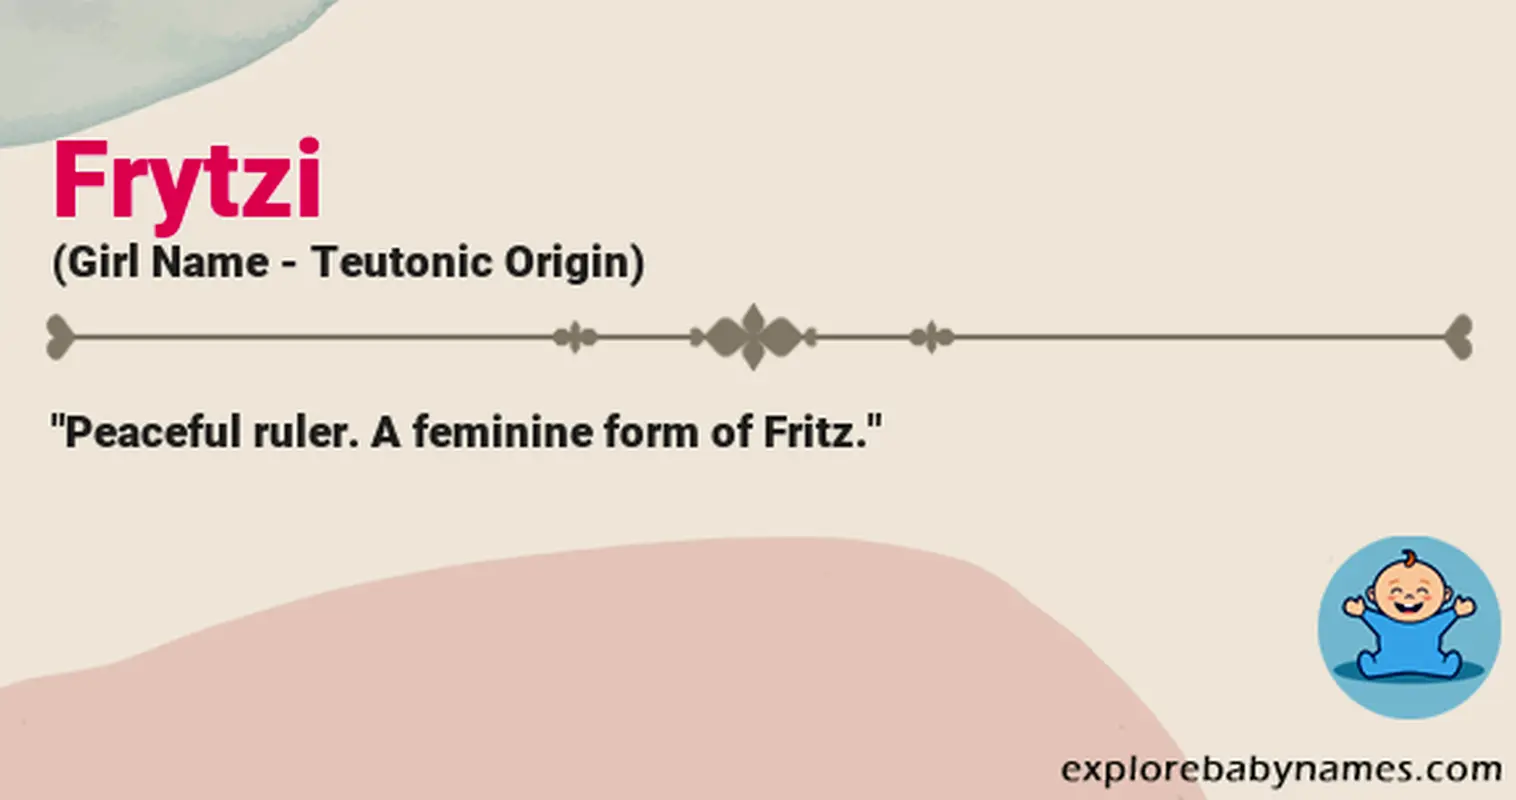 Meaning of Frytzi